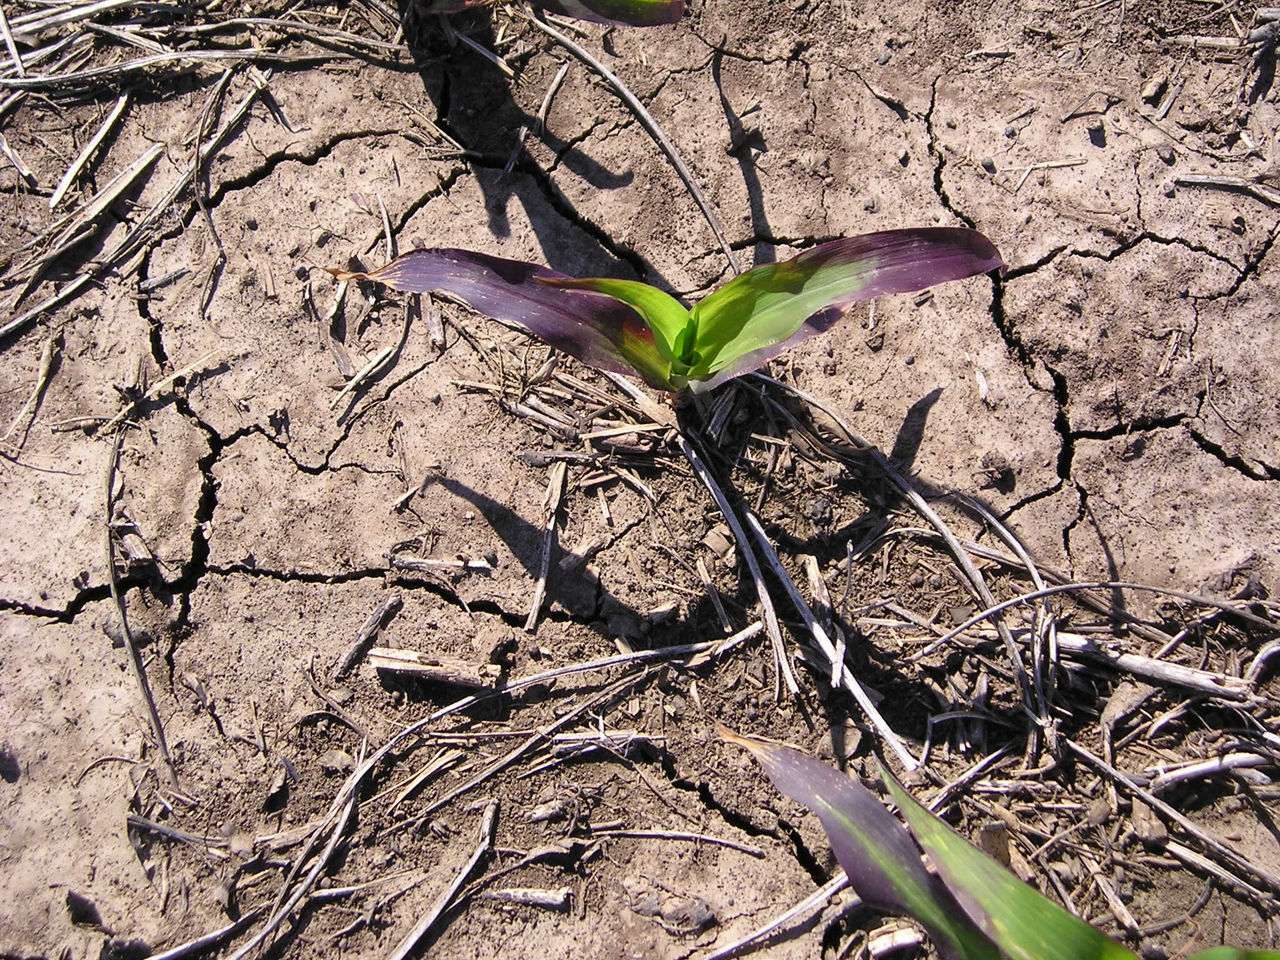 Figure 1. Stunted, purple corn due to phosphorus deficiency is a common symptom of corn with fallow syndrome.